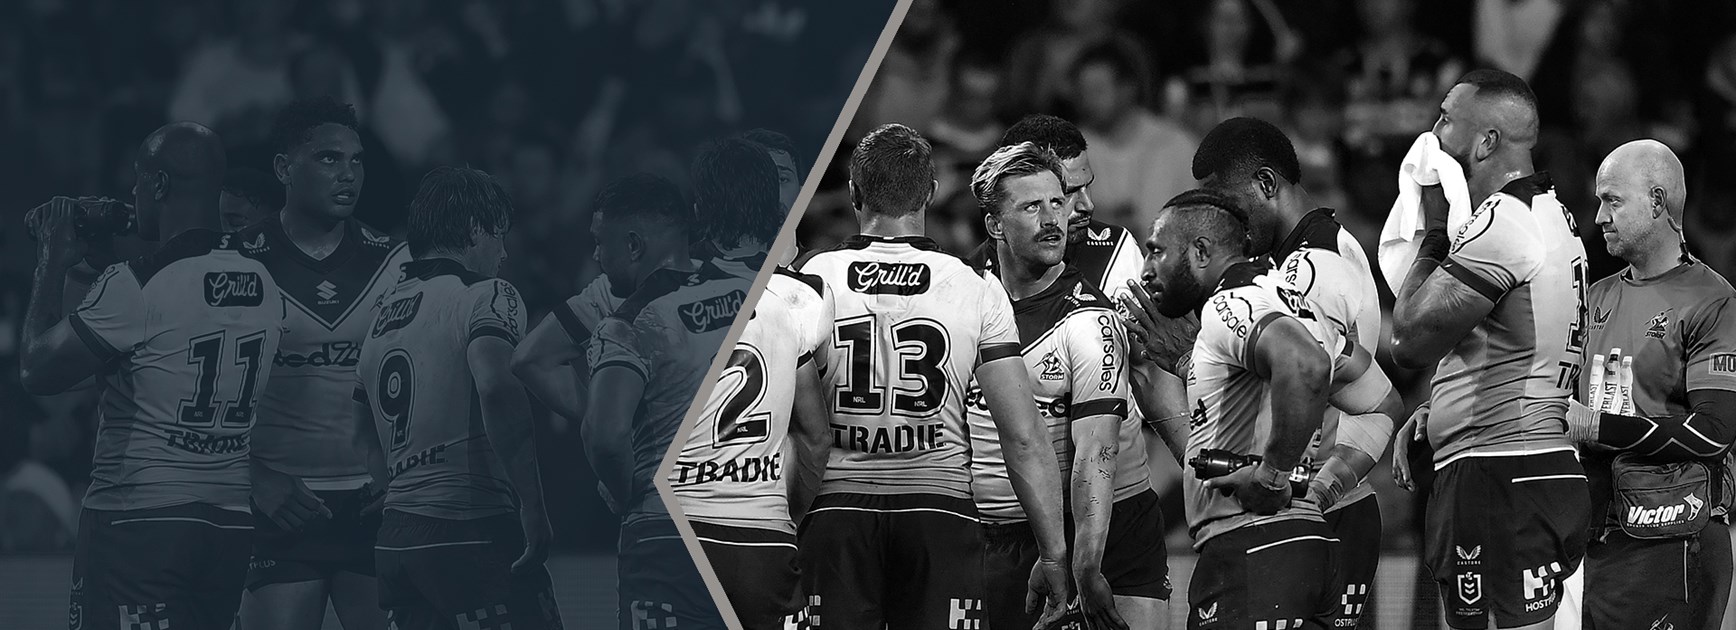 NRL Late Mail: Finals Week 1